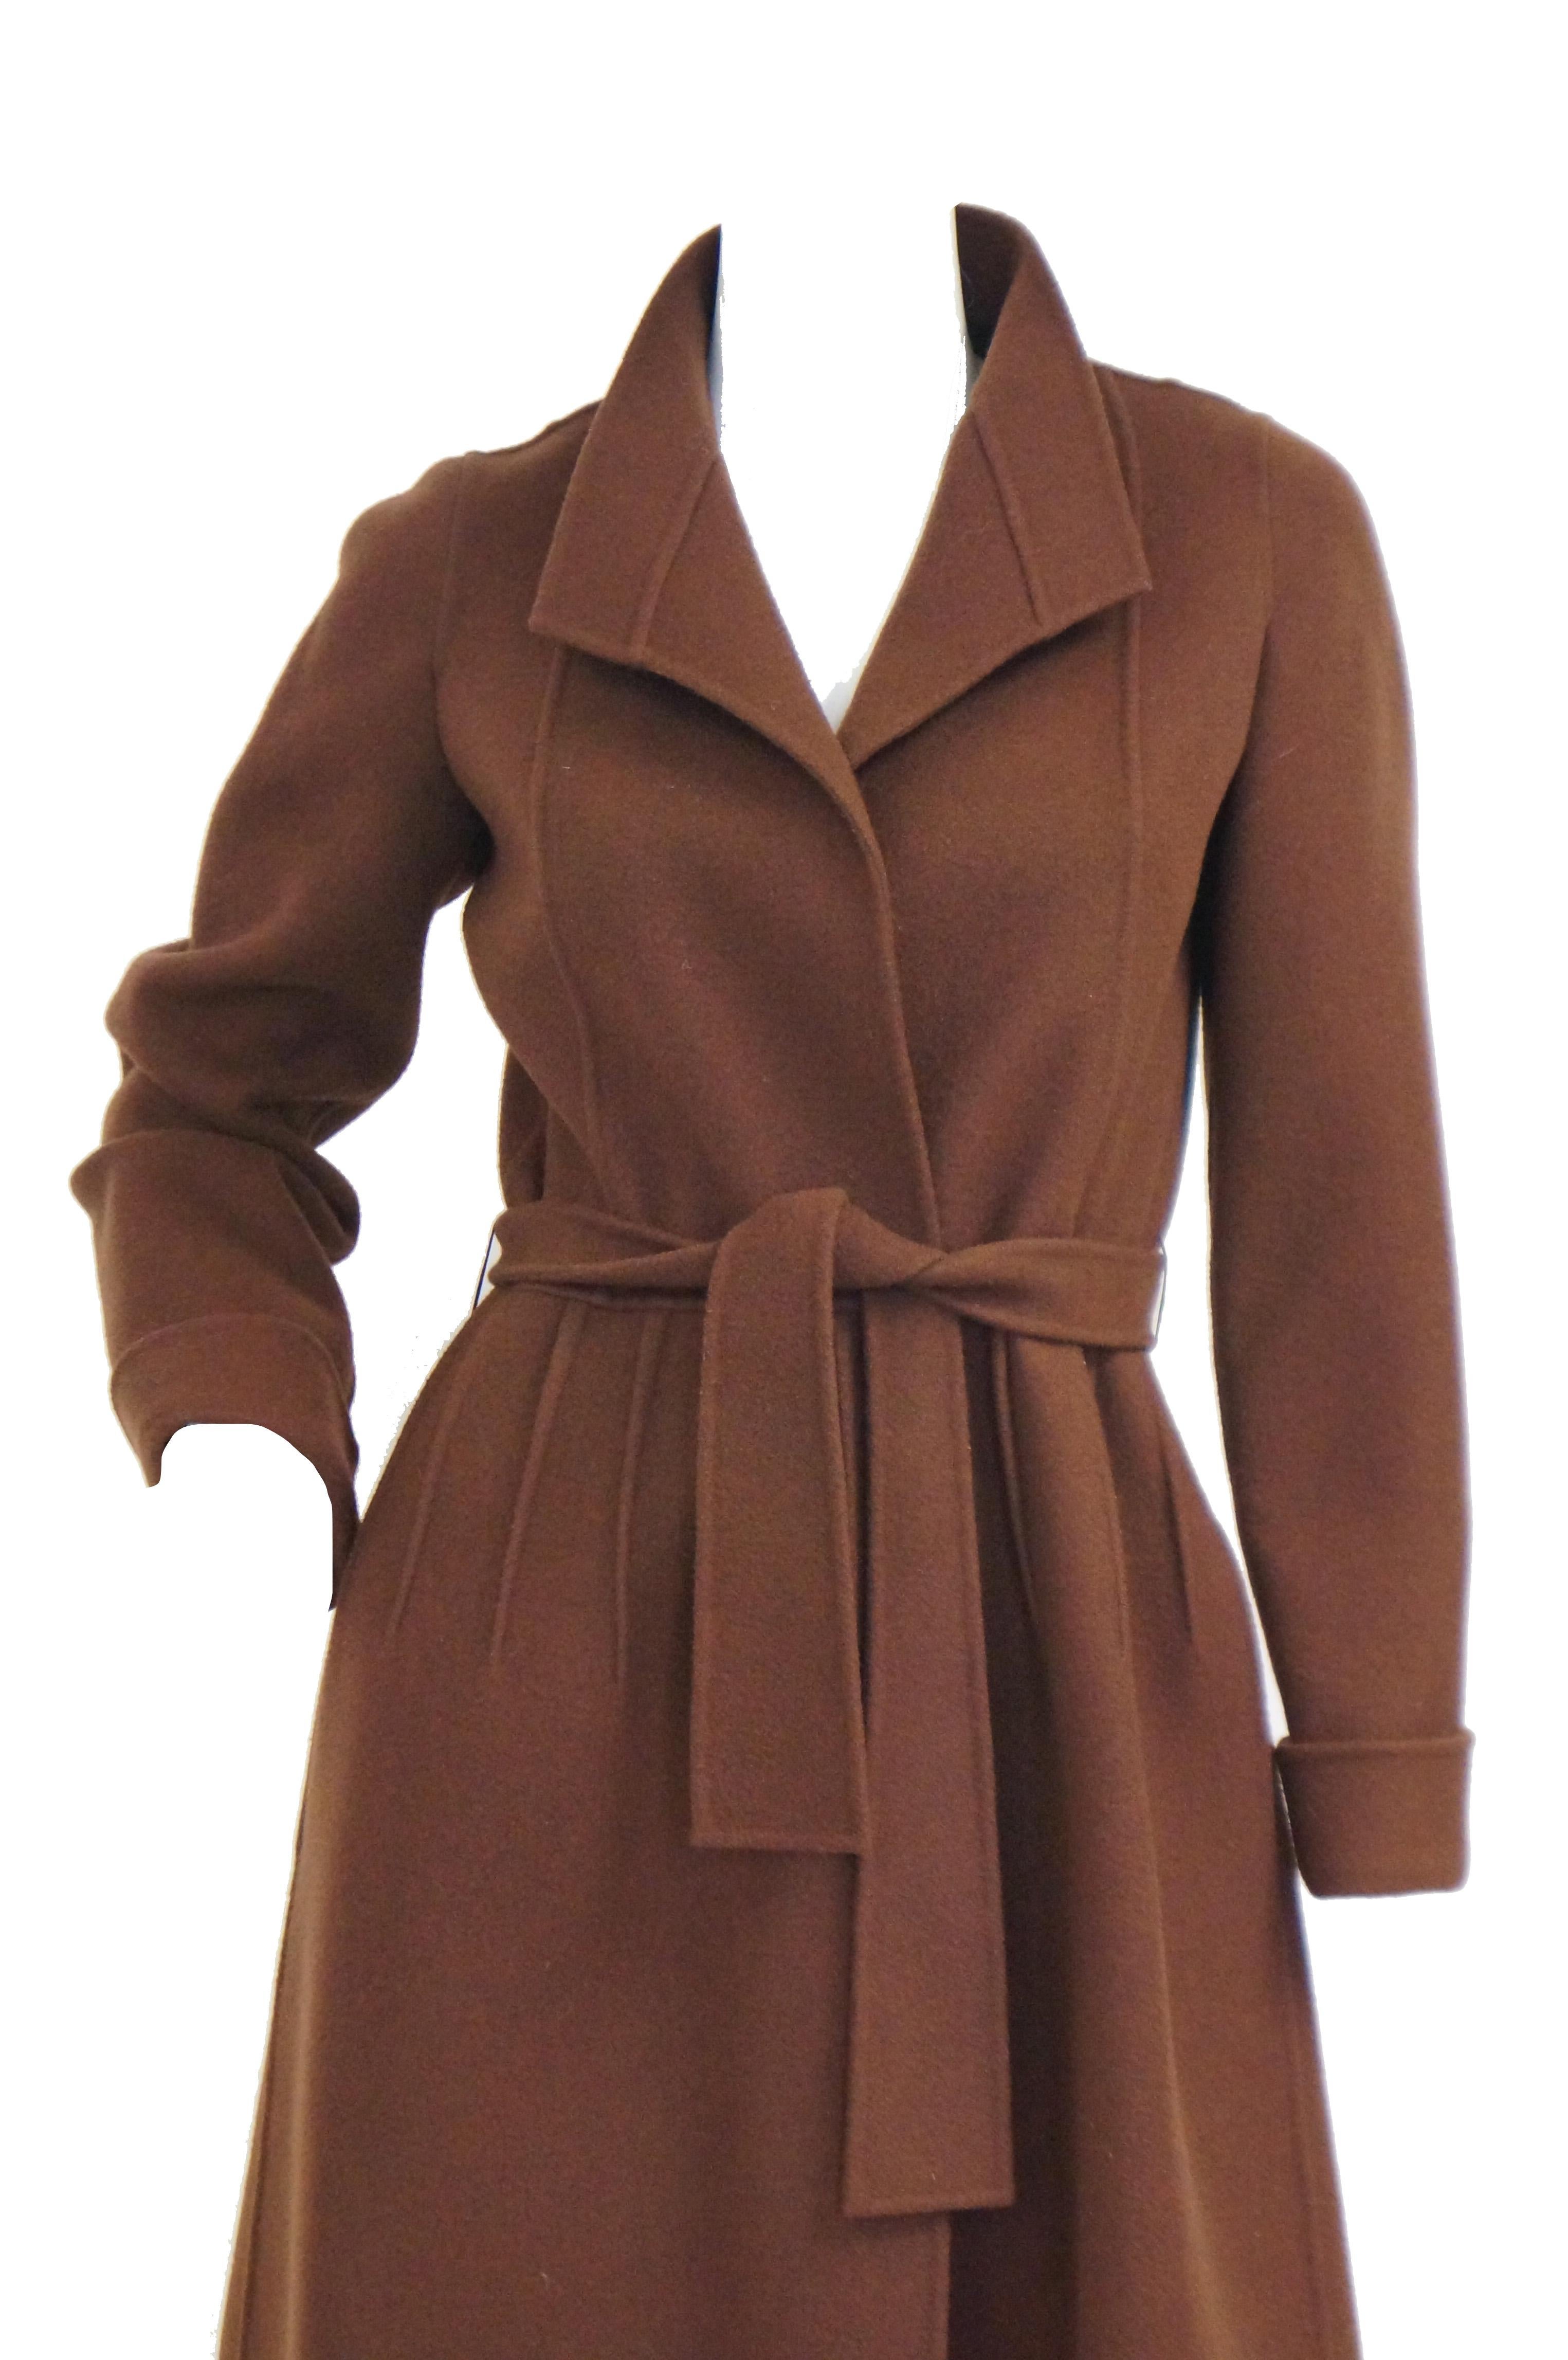 Andre Laug created a line of clothing inspired by Audrey Hepburn in the 70s. This brown wool coat  is simple and elegant just like her! Includes a belt and pockets. Made in Italy.
Itlay- 36
US 0-2 or XS
